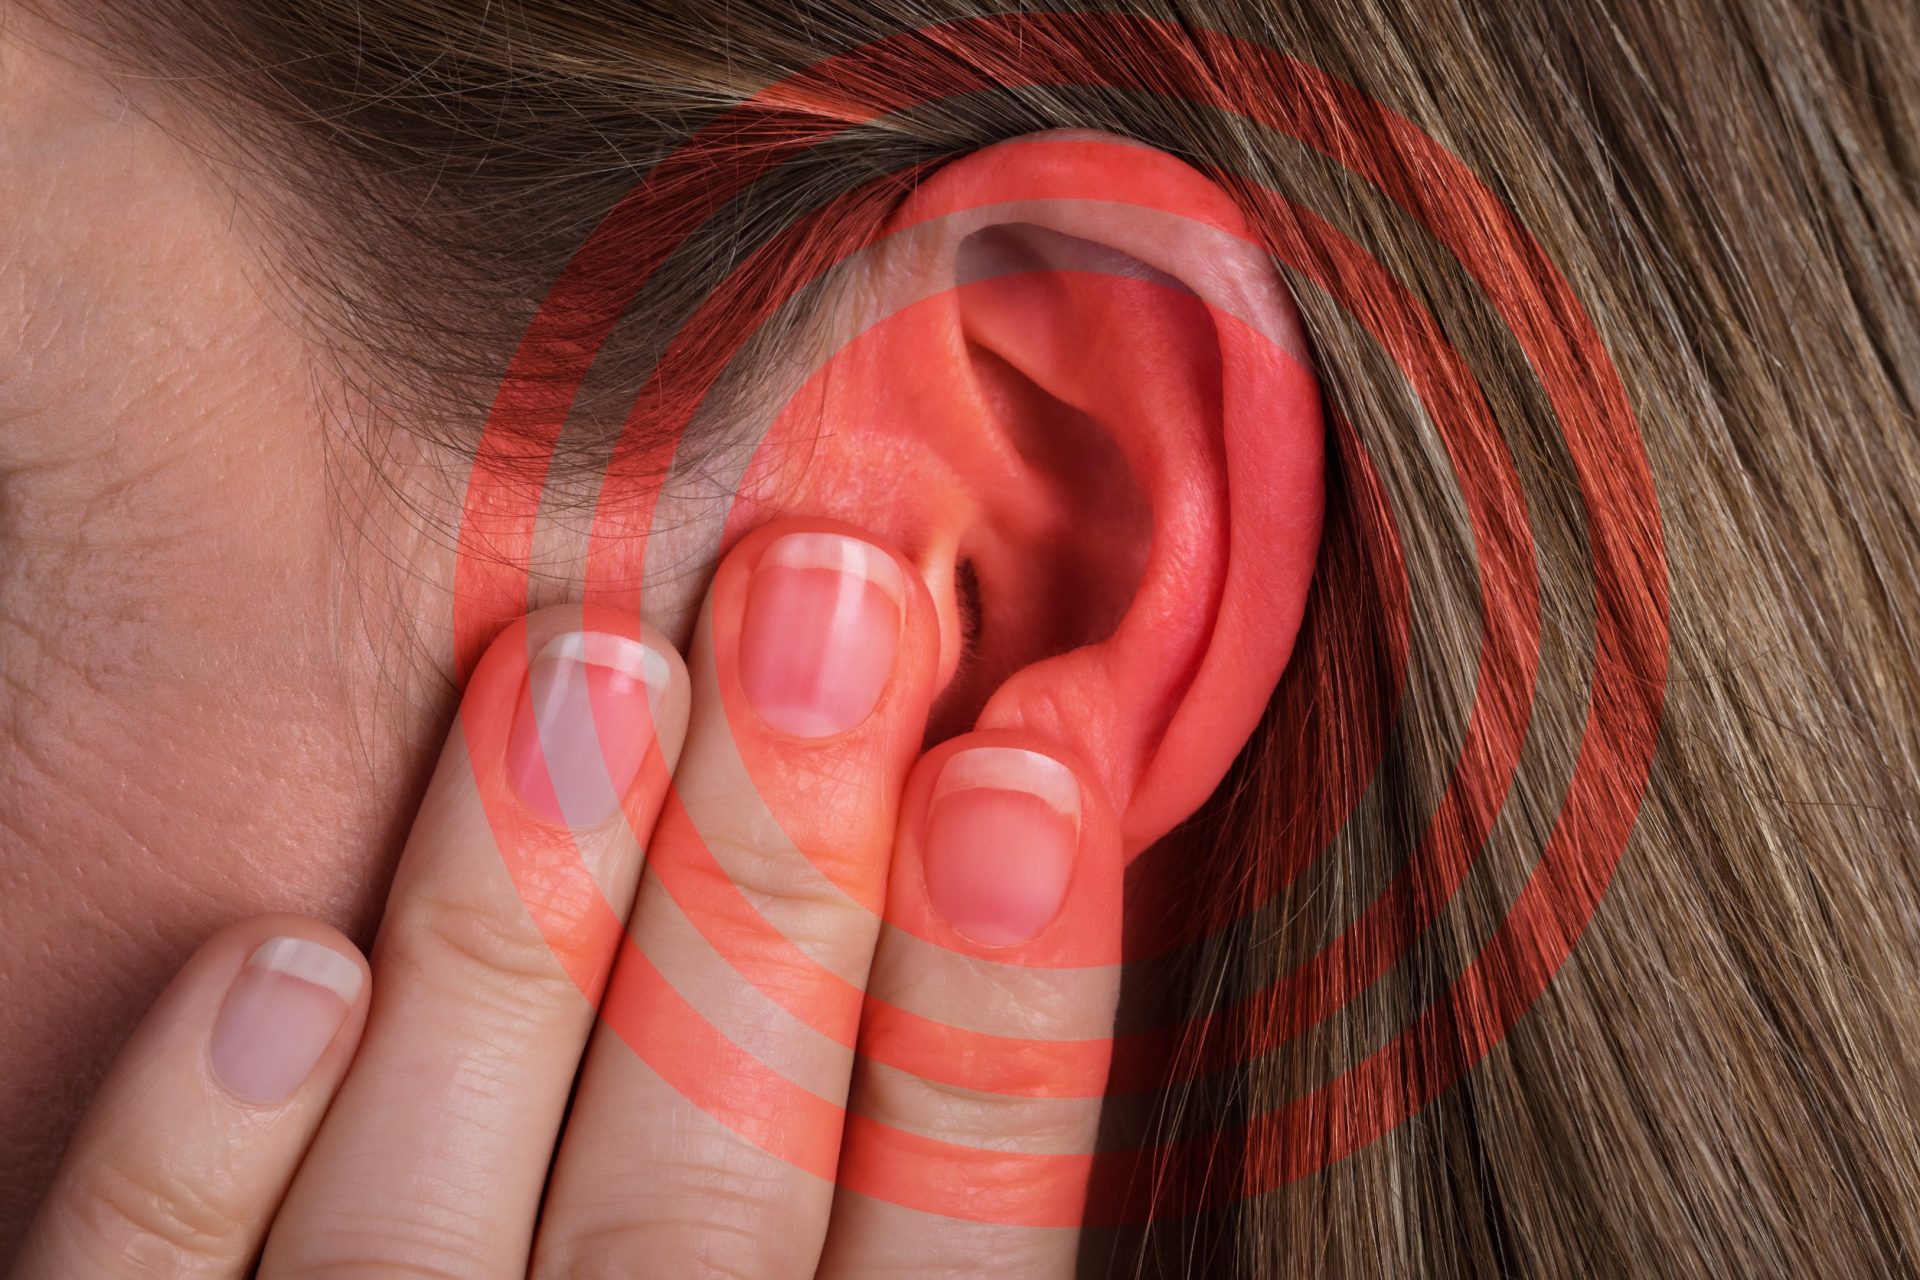 Hot Ears High Blood Pressure The Connection And What To Know